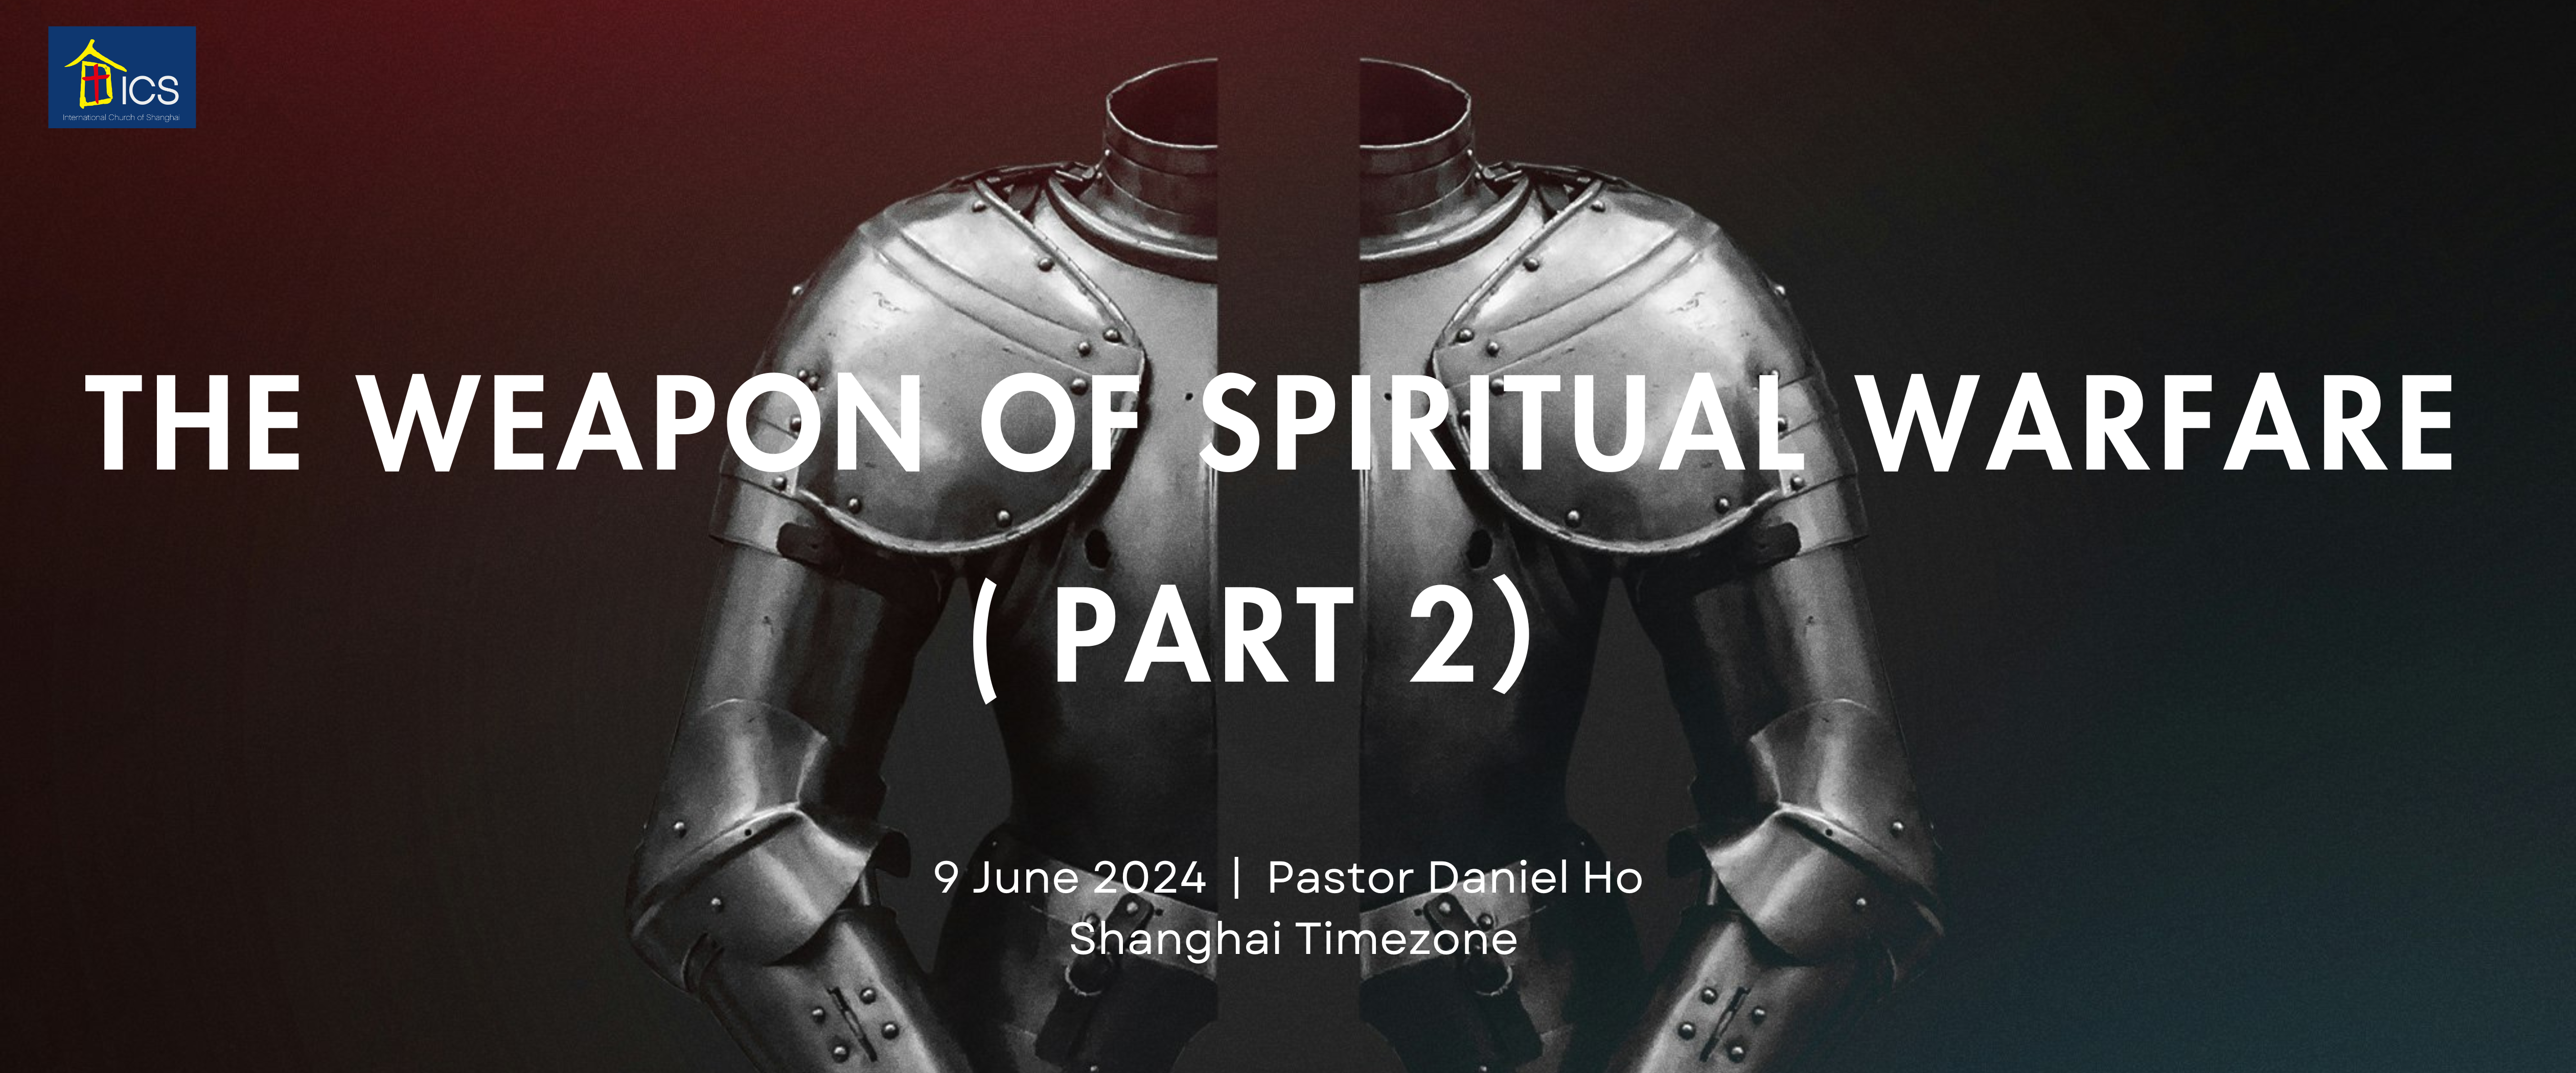 THE WEAPON OF OUR SPIRITUAL WARFARE (PART 2)